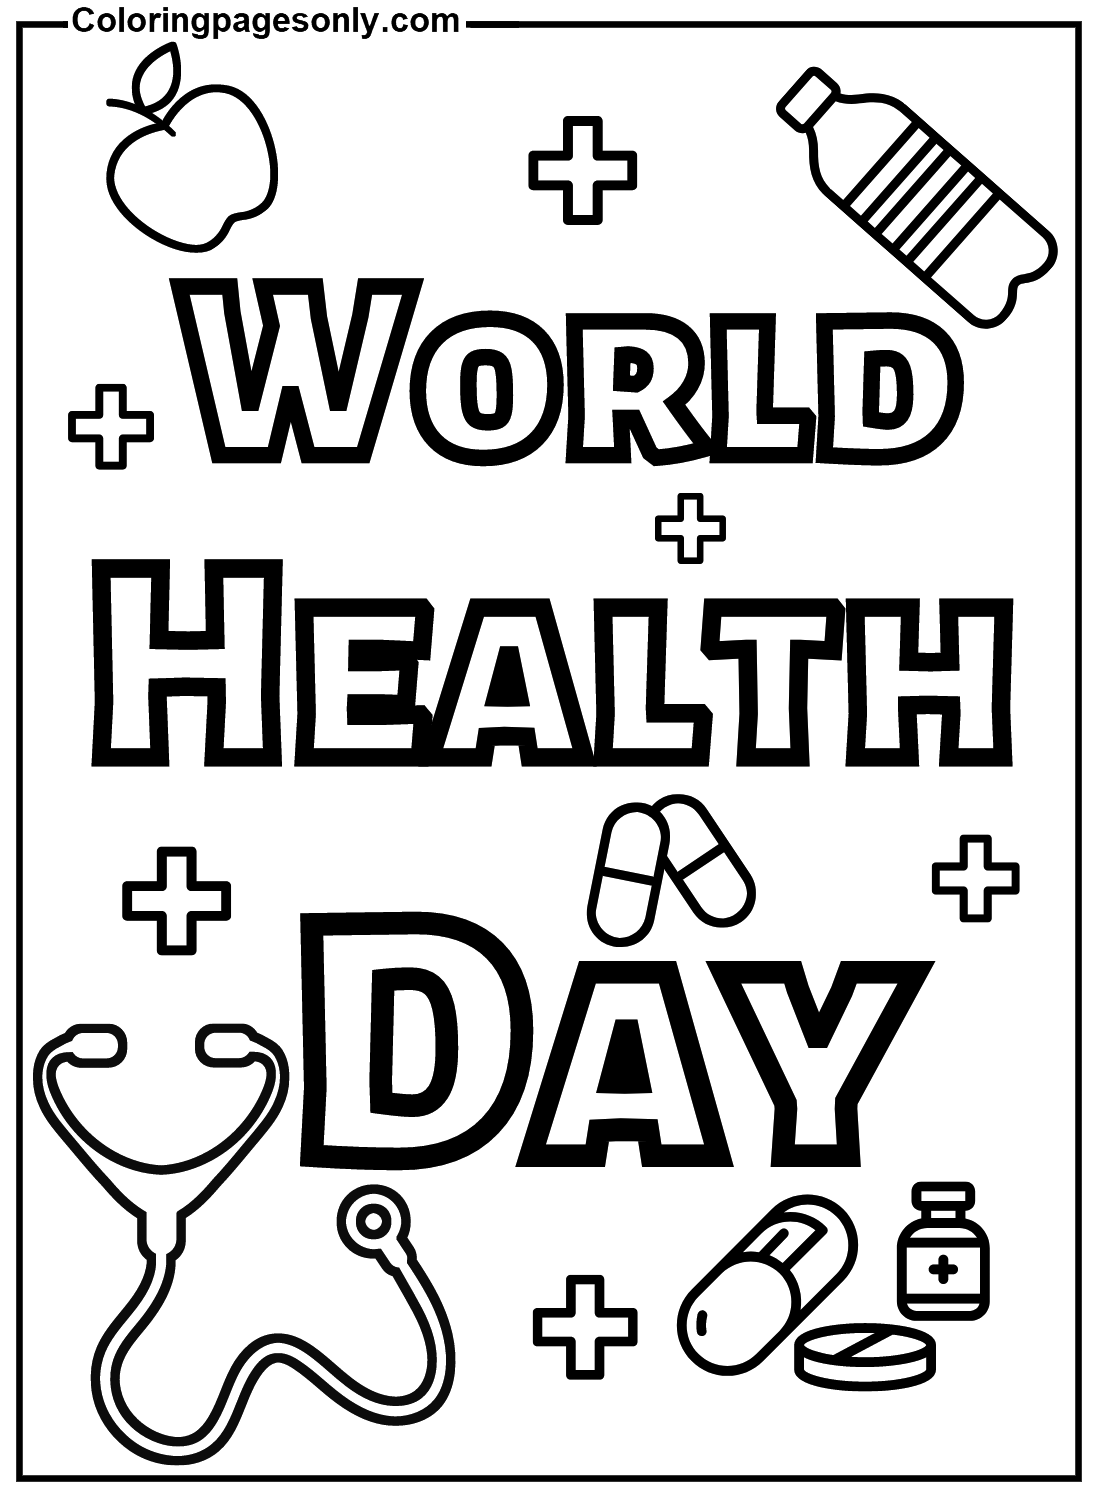 World Health Day Images Coloring Page